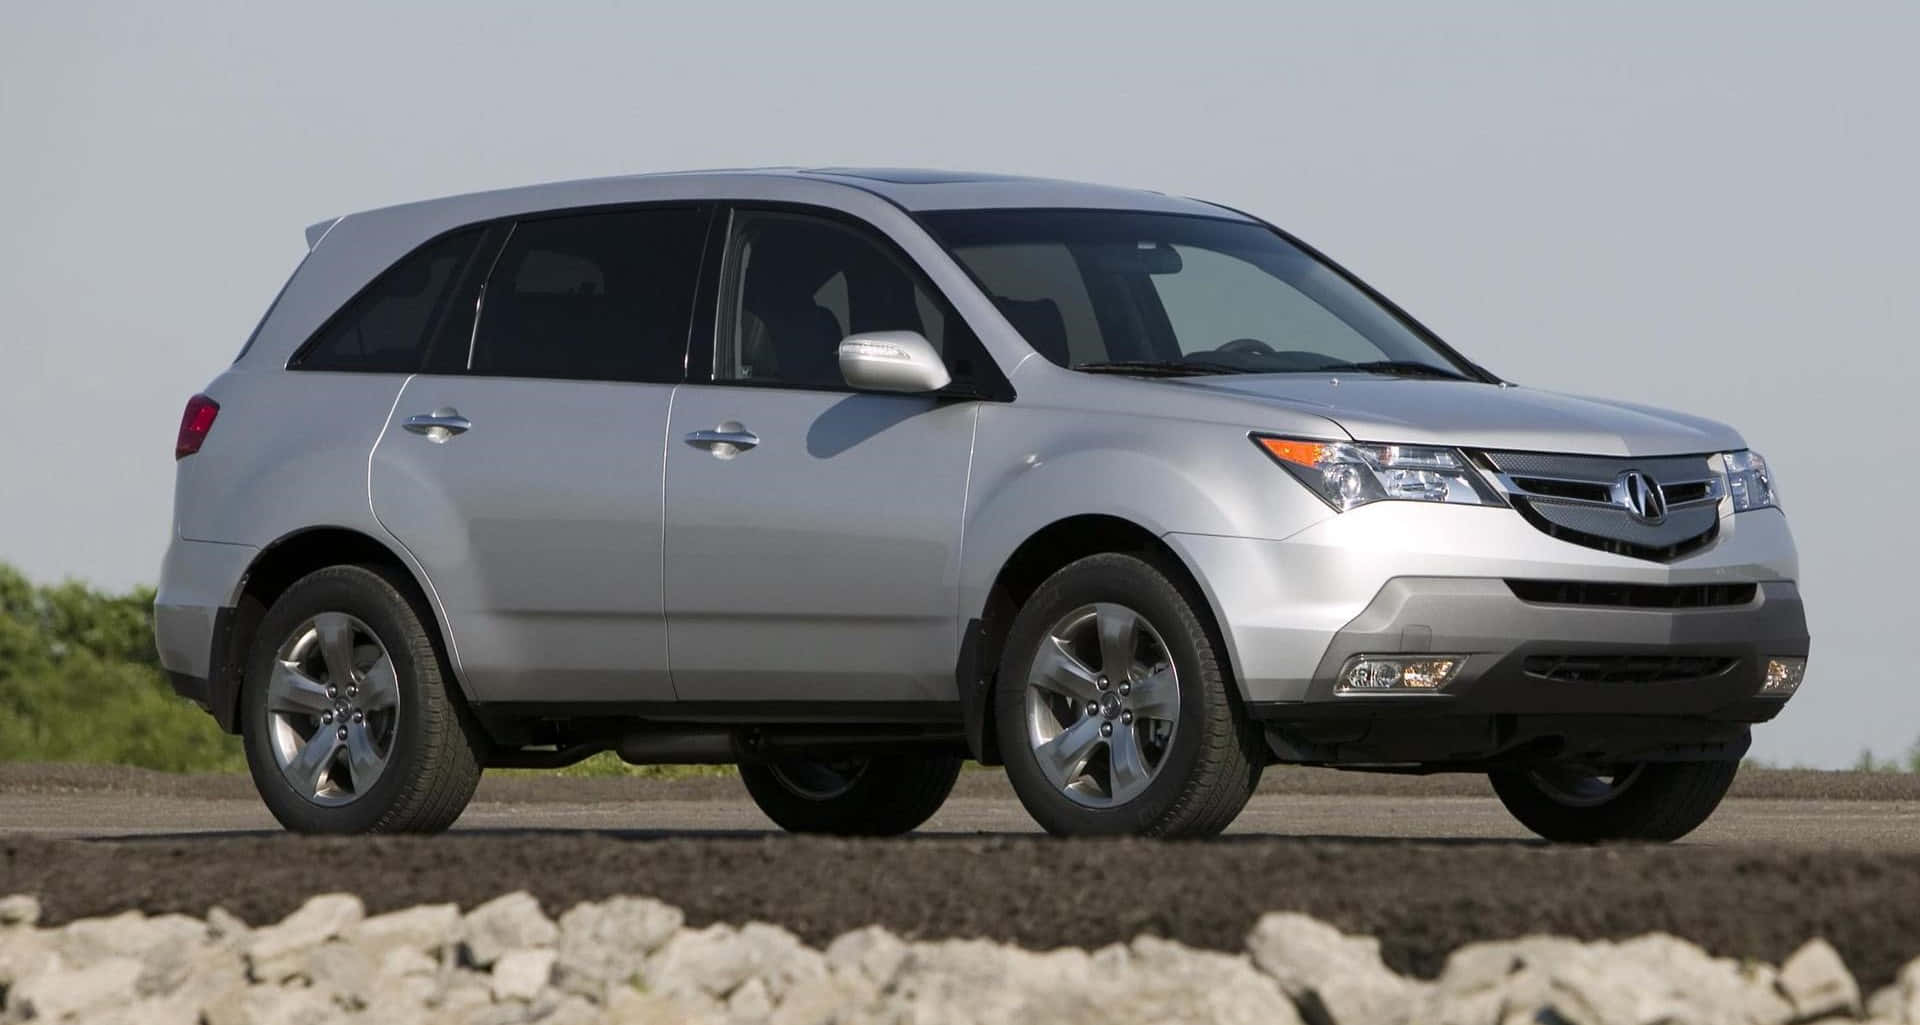 Caption: A Sleek and Stylish Acura MDX on the Road Wallpaper